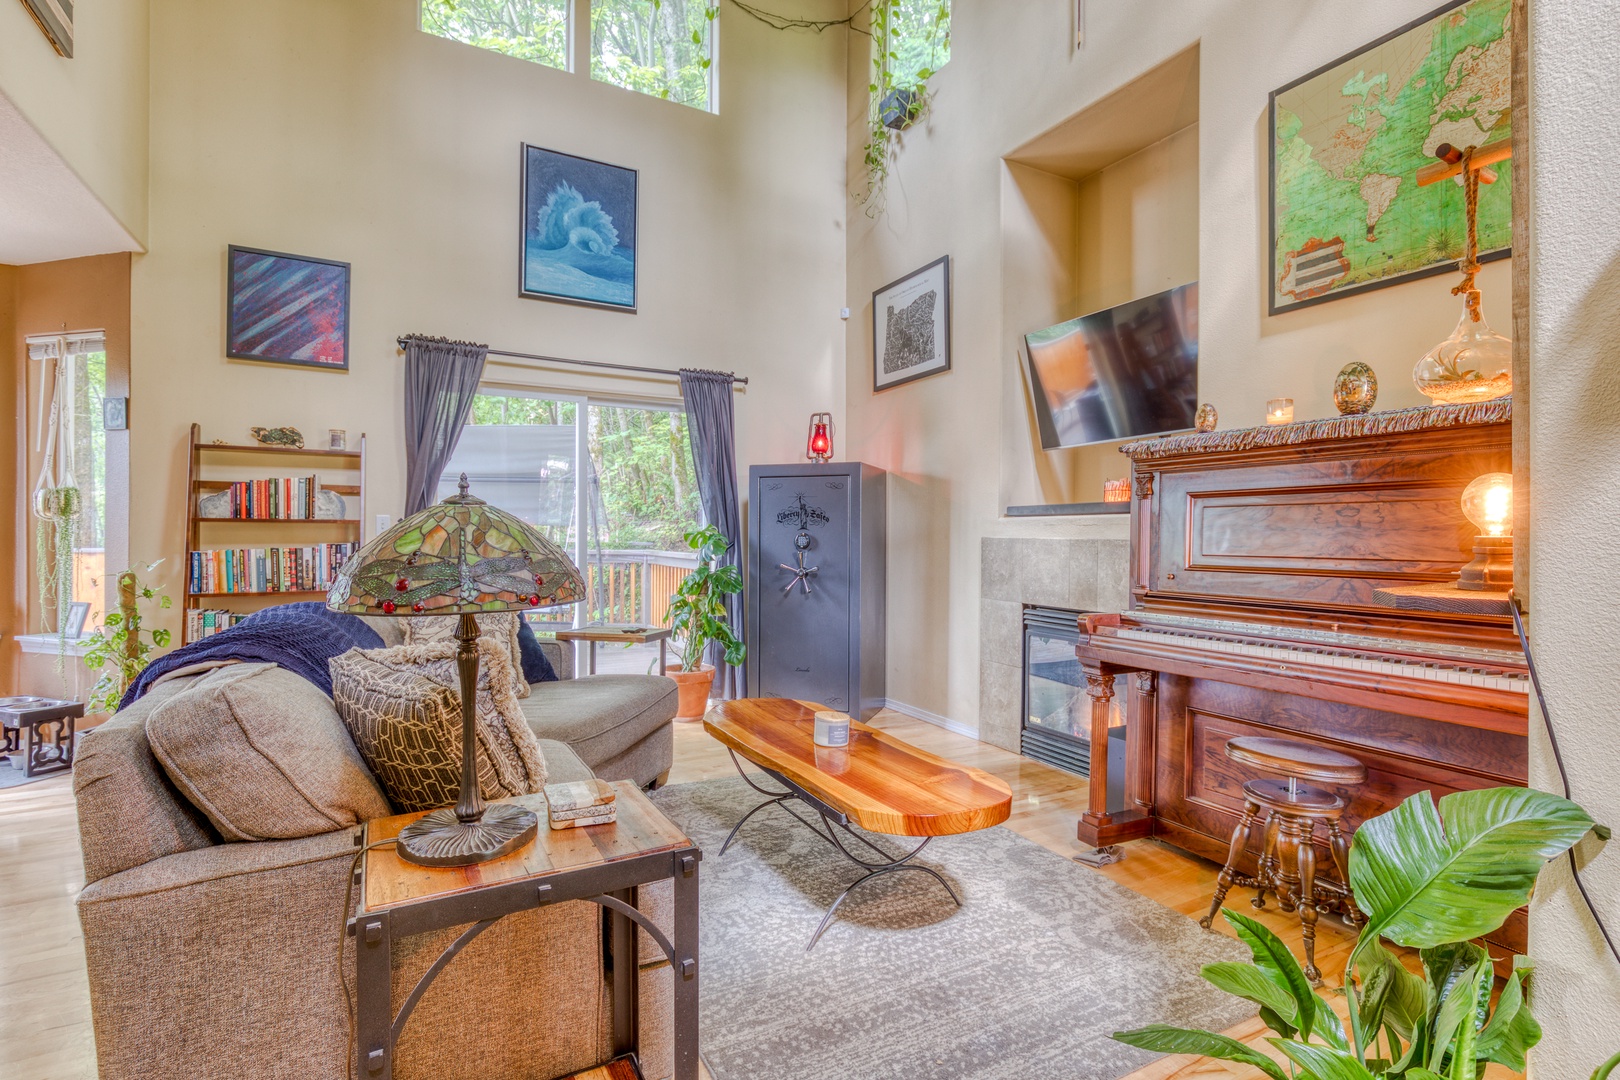 Clackamas Vacation Rentals, Duck Crossing - The living room is quite charming